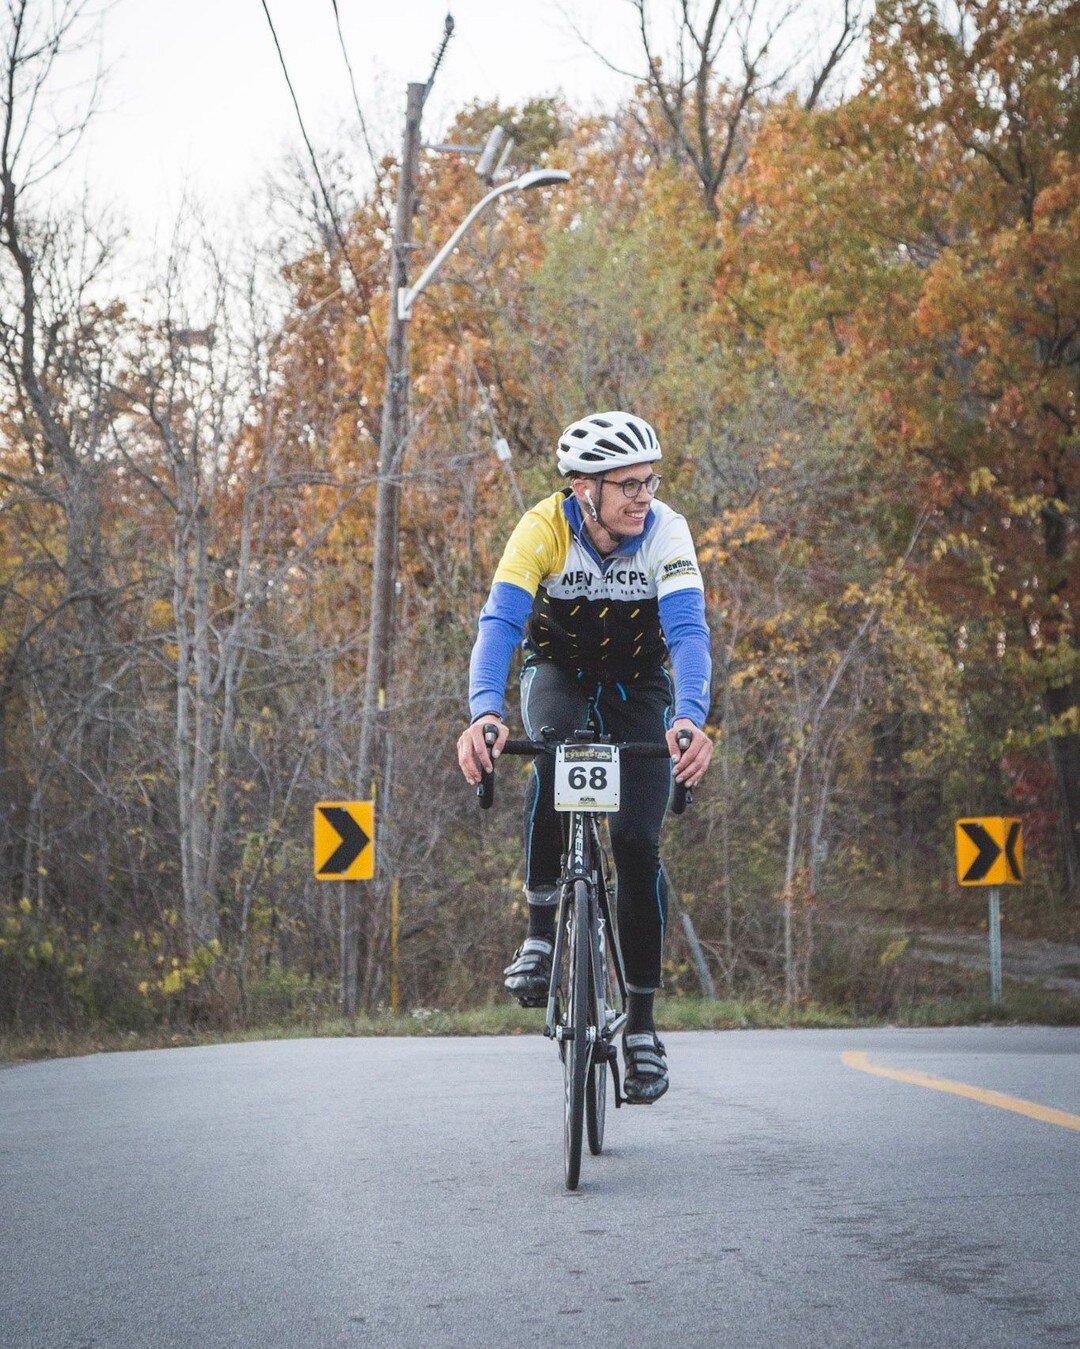 Contemplating a Solo effort? Even though you may be counting laps on your own, you won't really be on your own! Our event coordinators and volunteers make sure to stick around until the very last rider is off the hill. Sometimes this has been after m